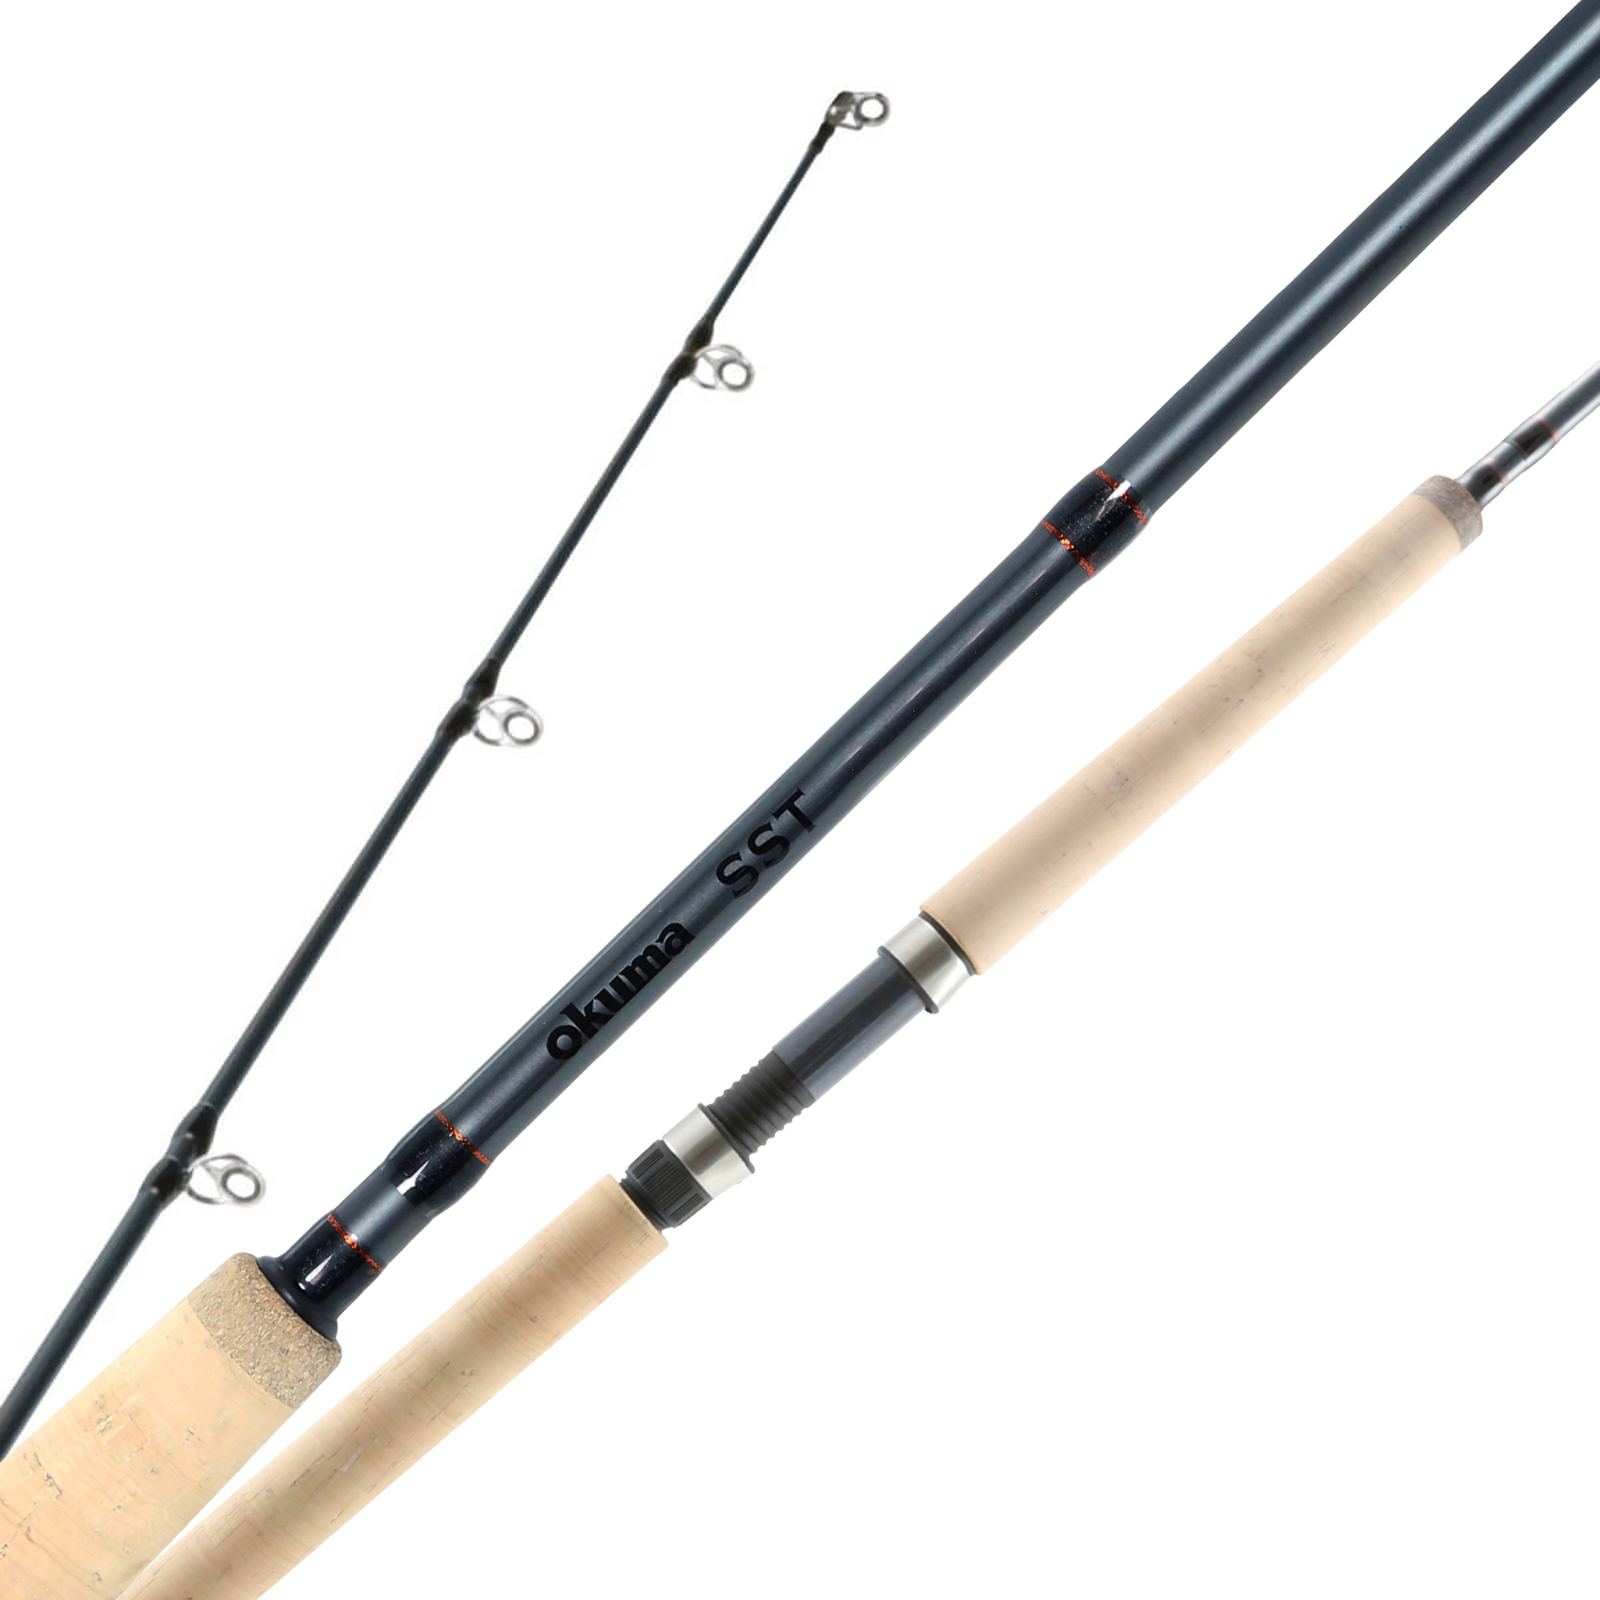 Okuma SST A Series Float Rod with Reel Seat, 6 - 12 lbs, 3 Piece  SST-S-1343FFa , $8.00 Off with Free S&H — CampSaver